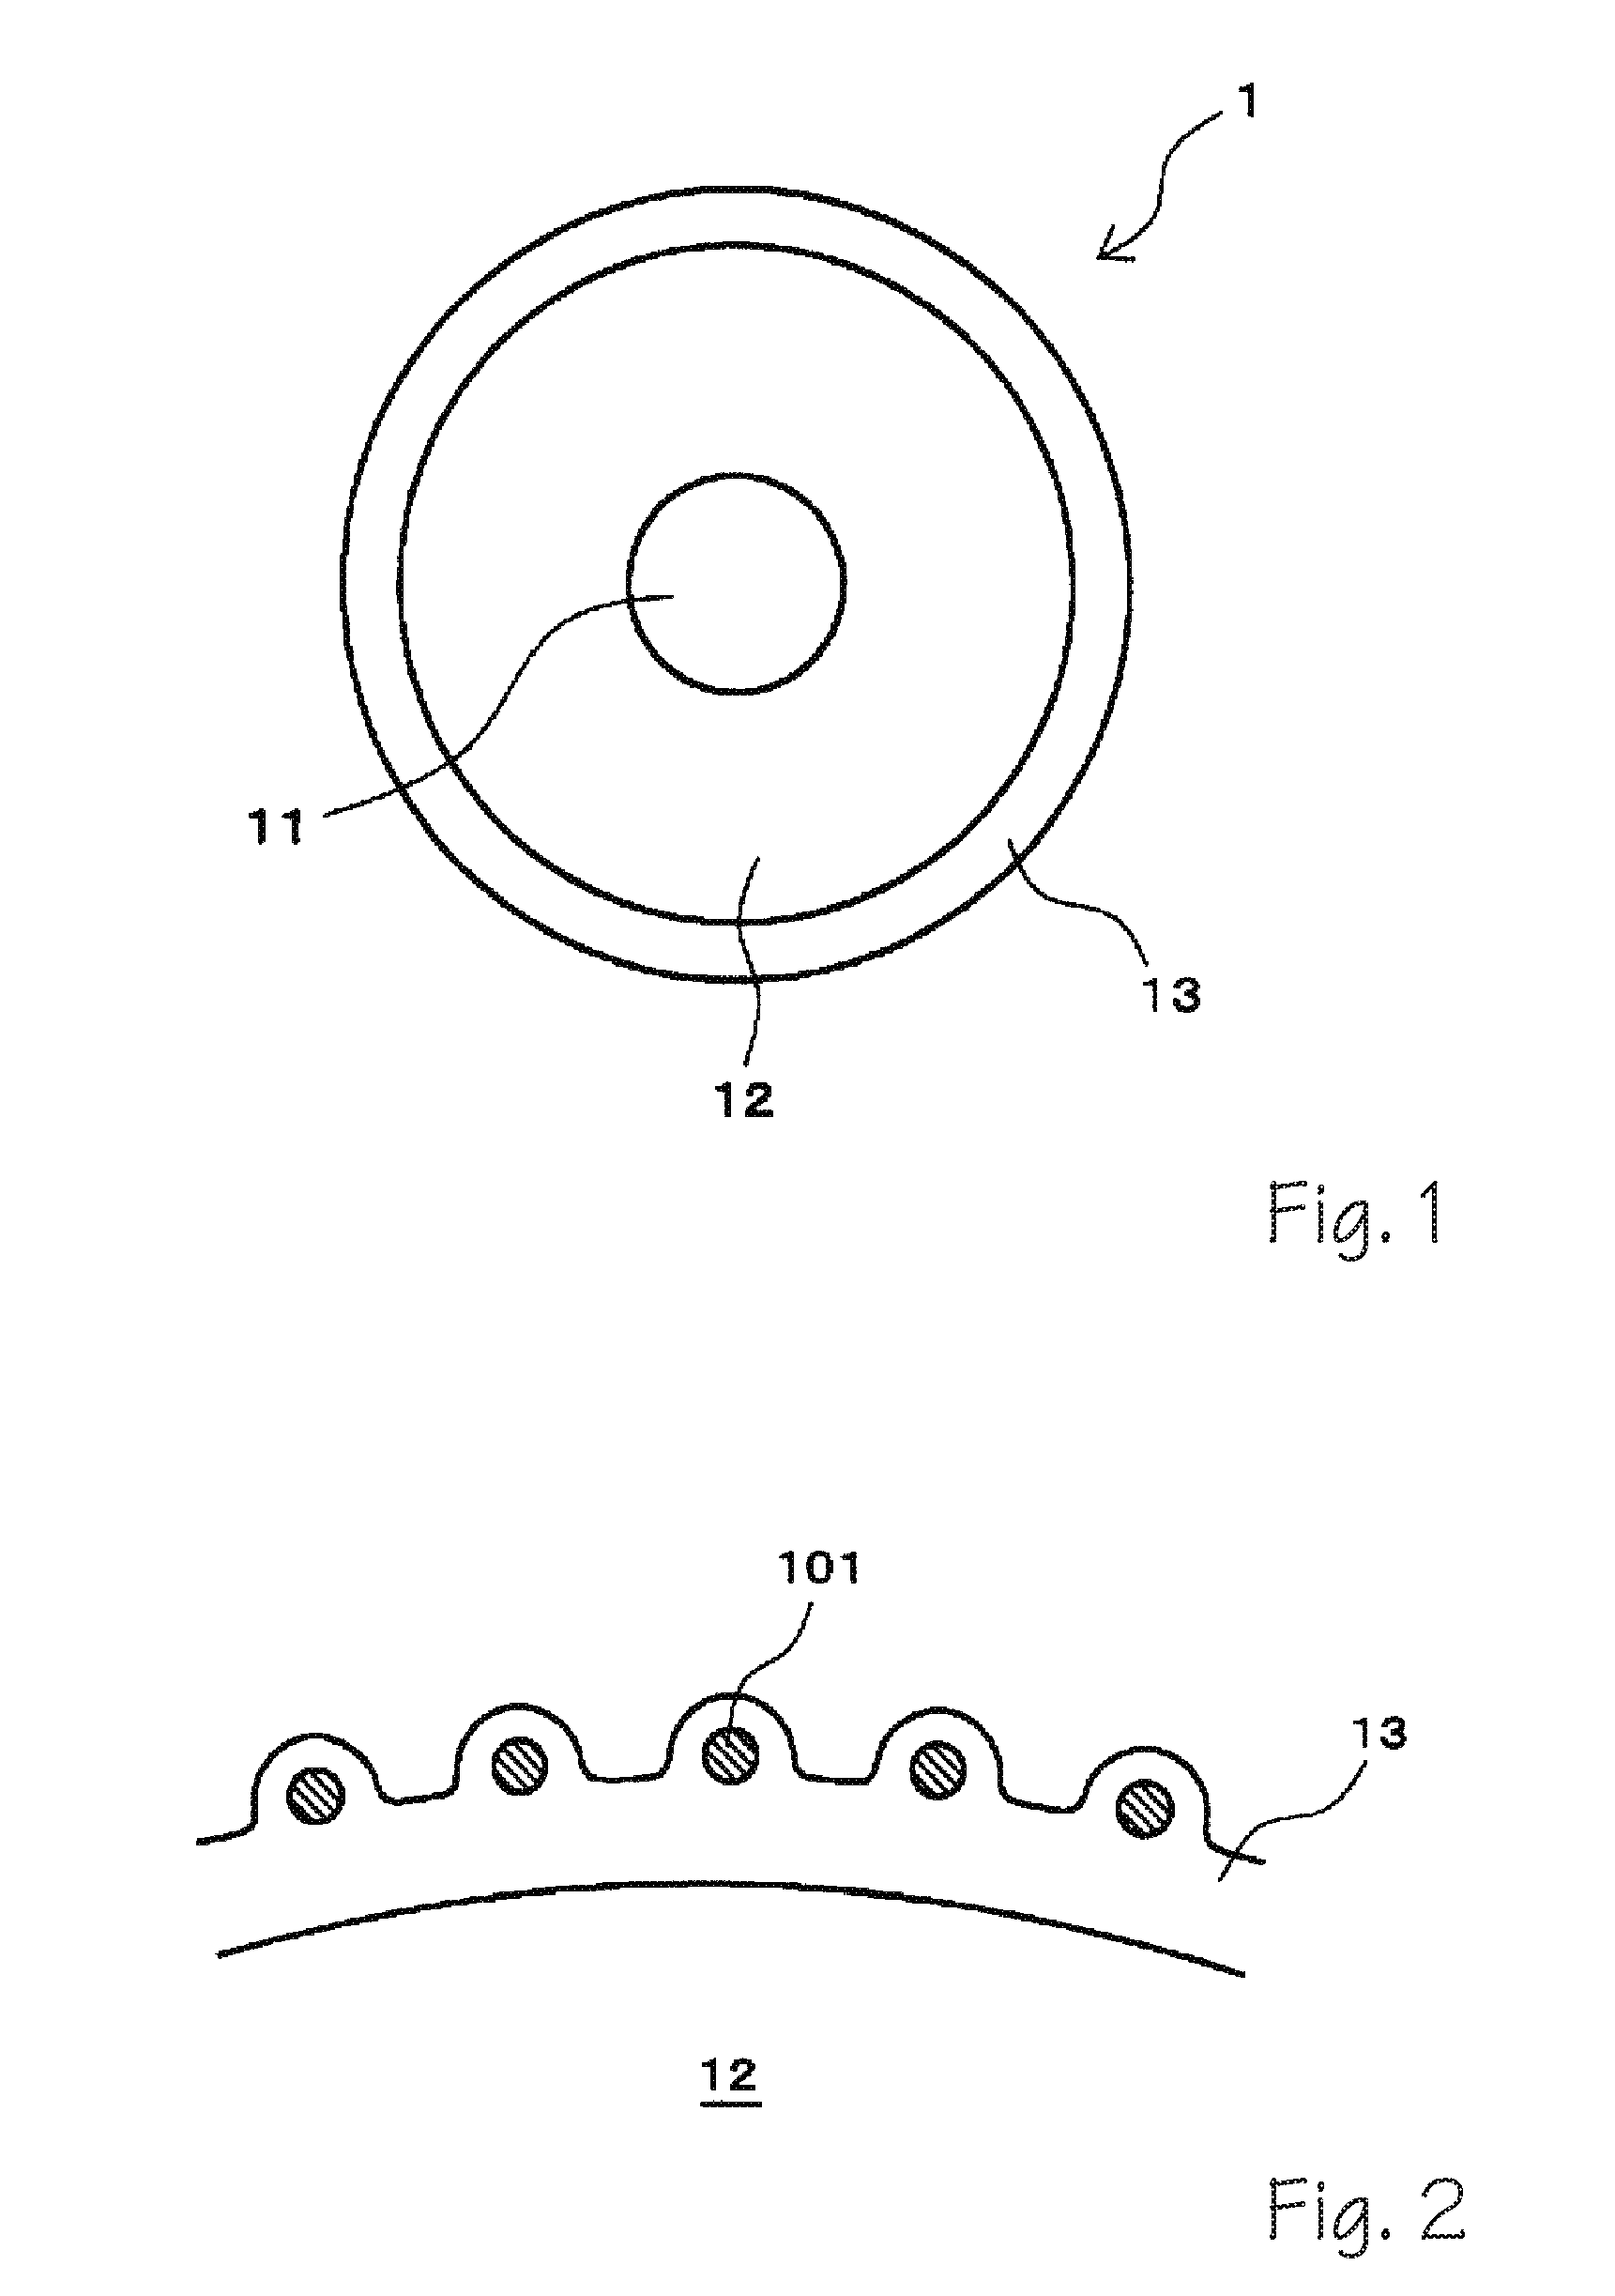 Rubber Member for Coating Developing Roll and Manufacturing Method of Developing Roll for Image Forming Apparatus